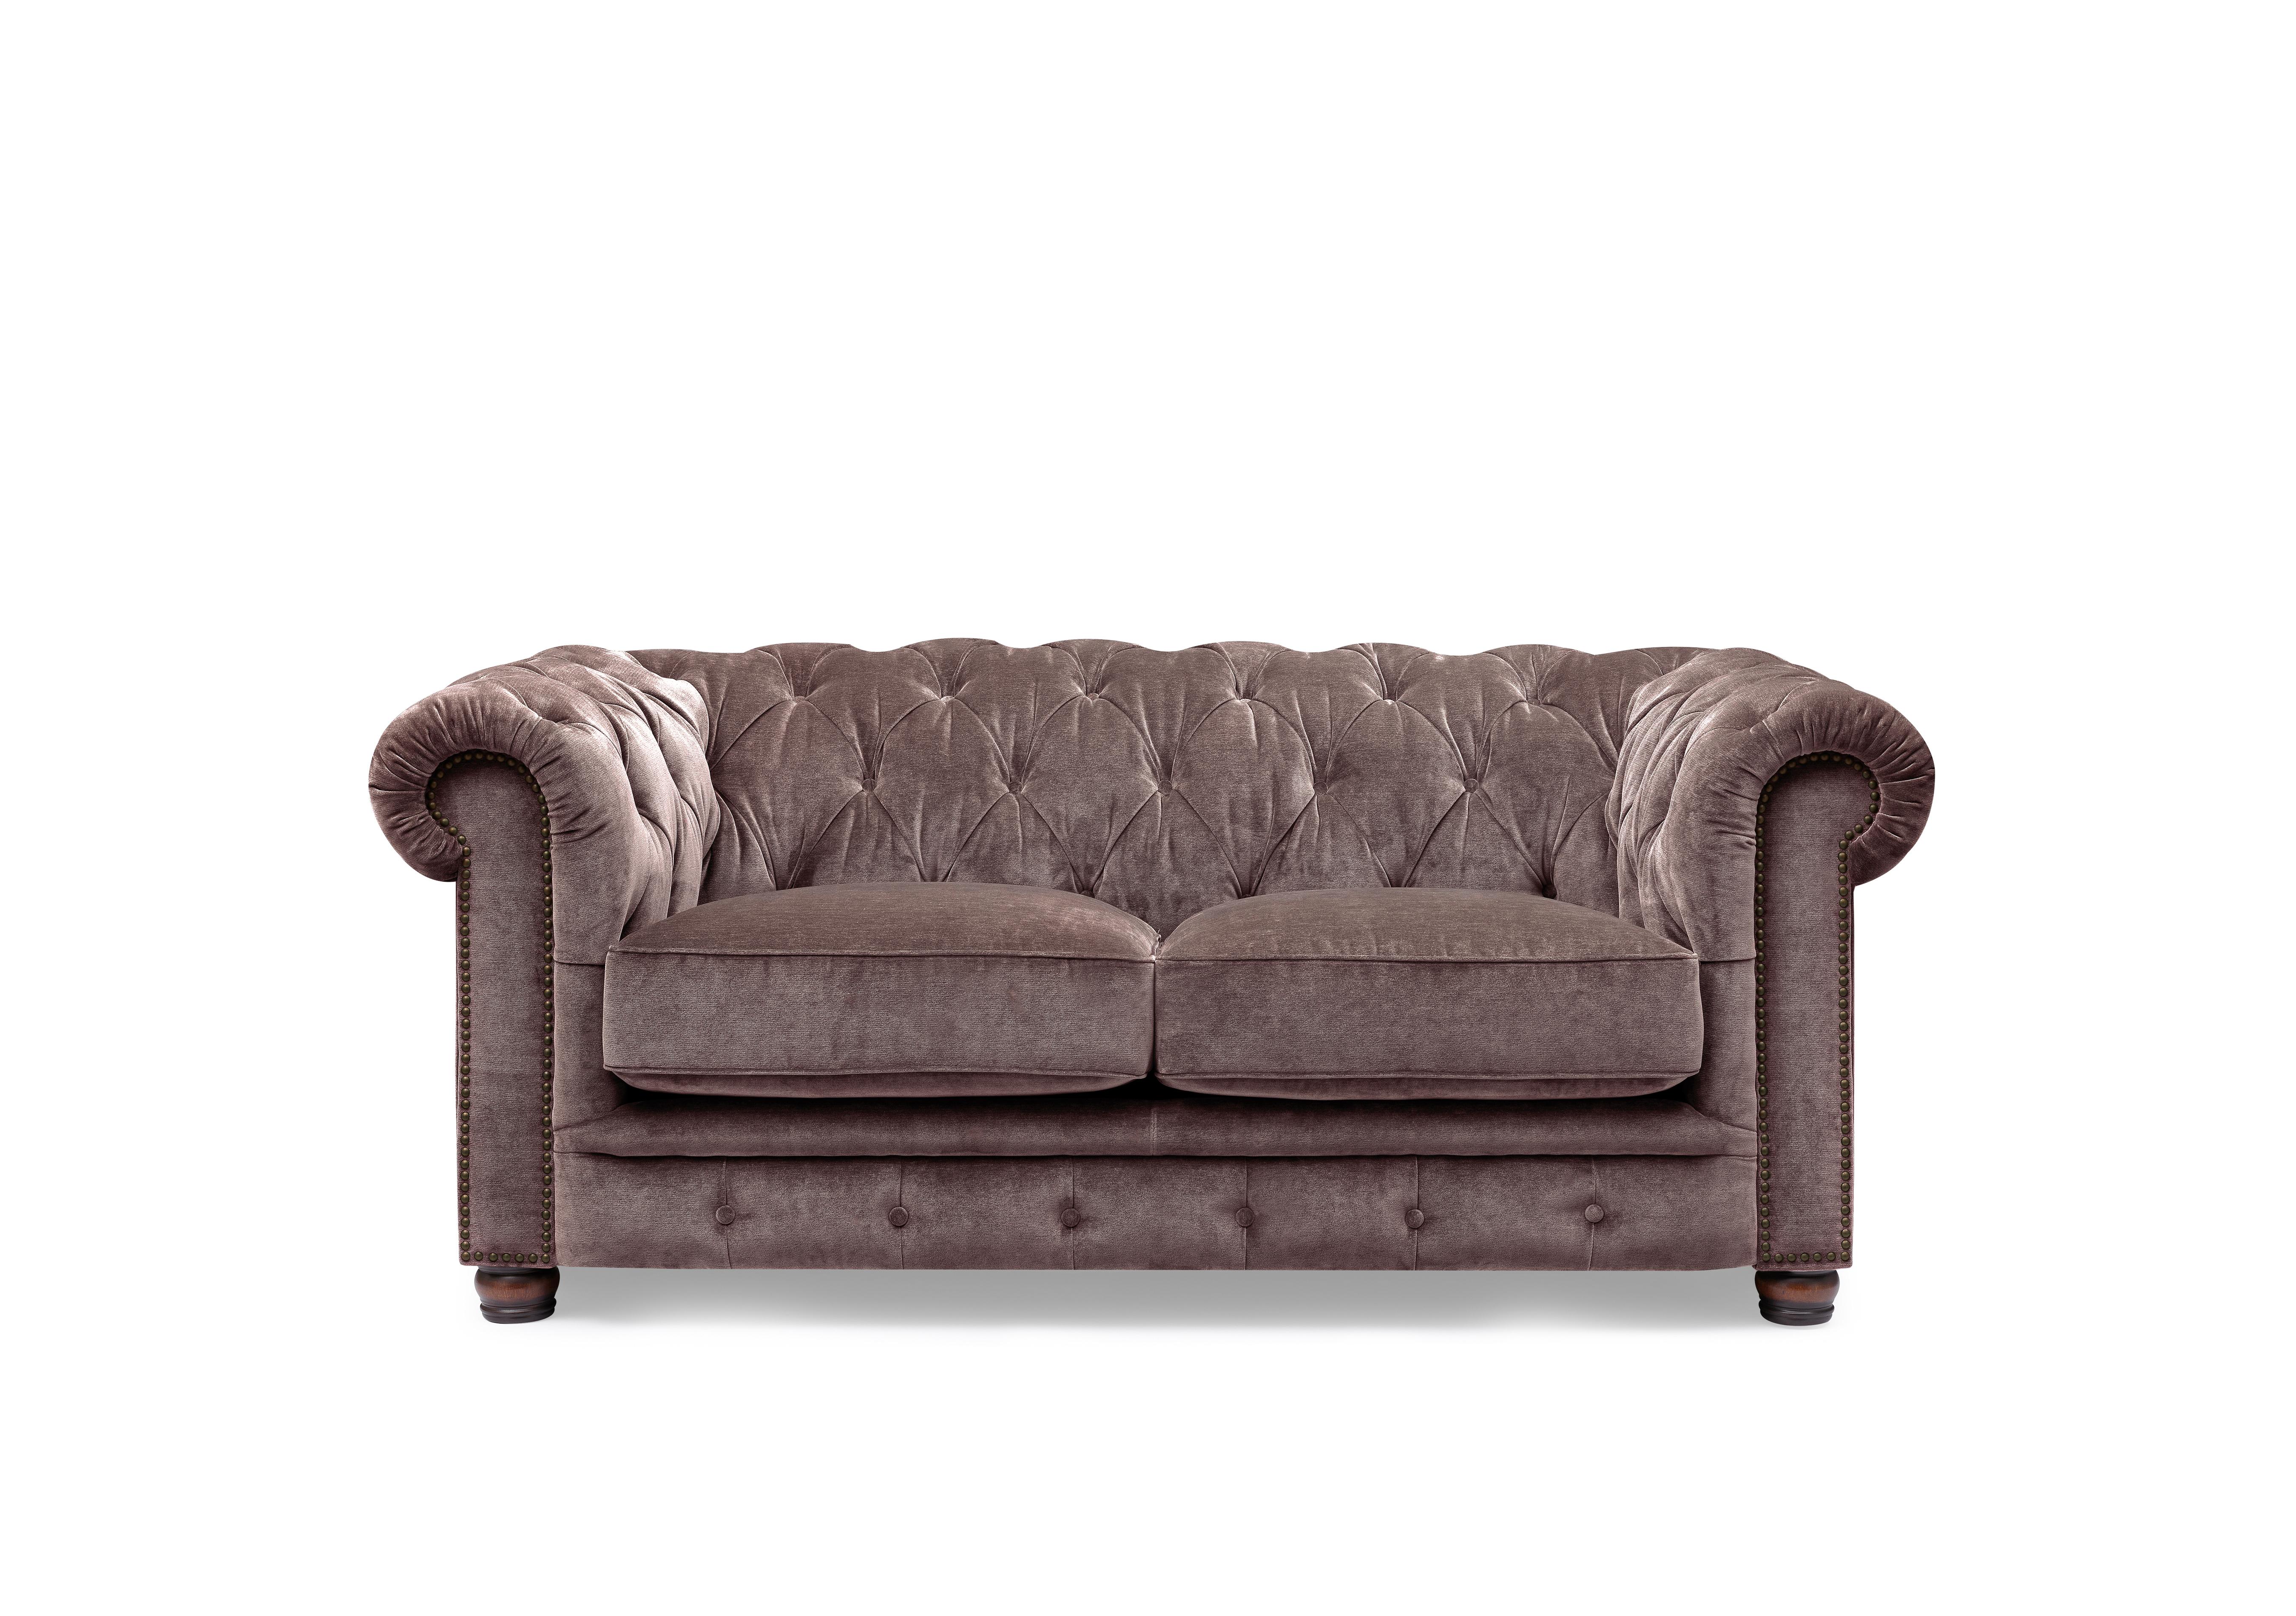 Shackleton 2 Seater Fabric Chesterfield Sofa in X3y1-W023 Antler on Furniture Village